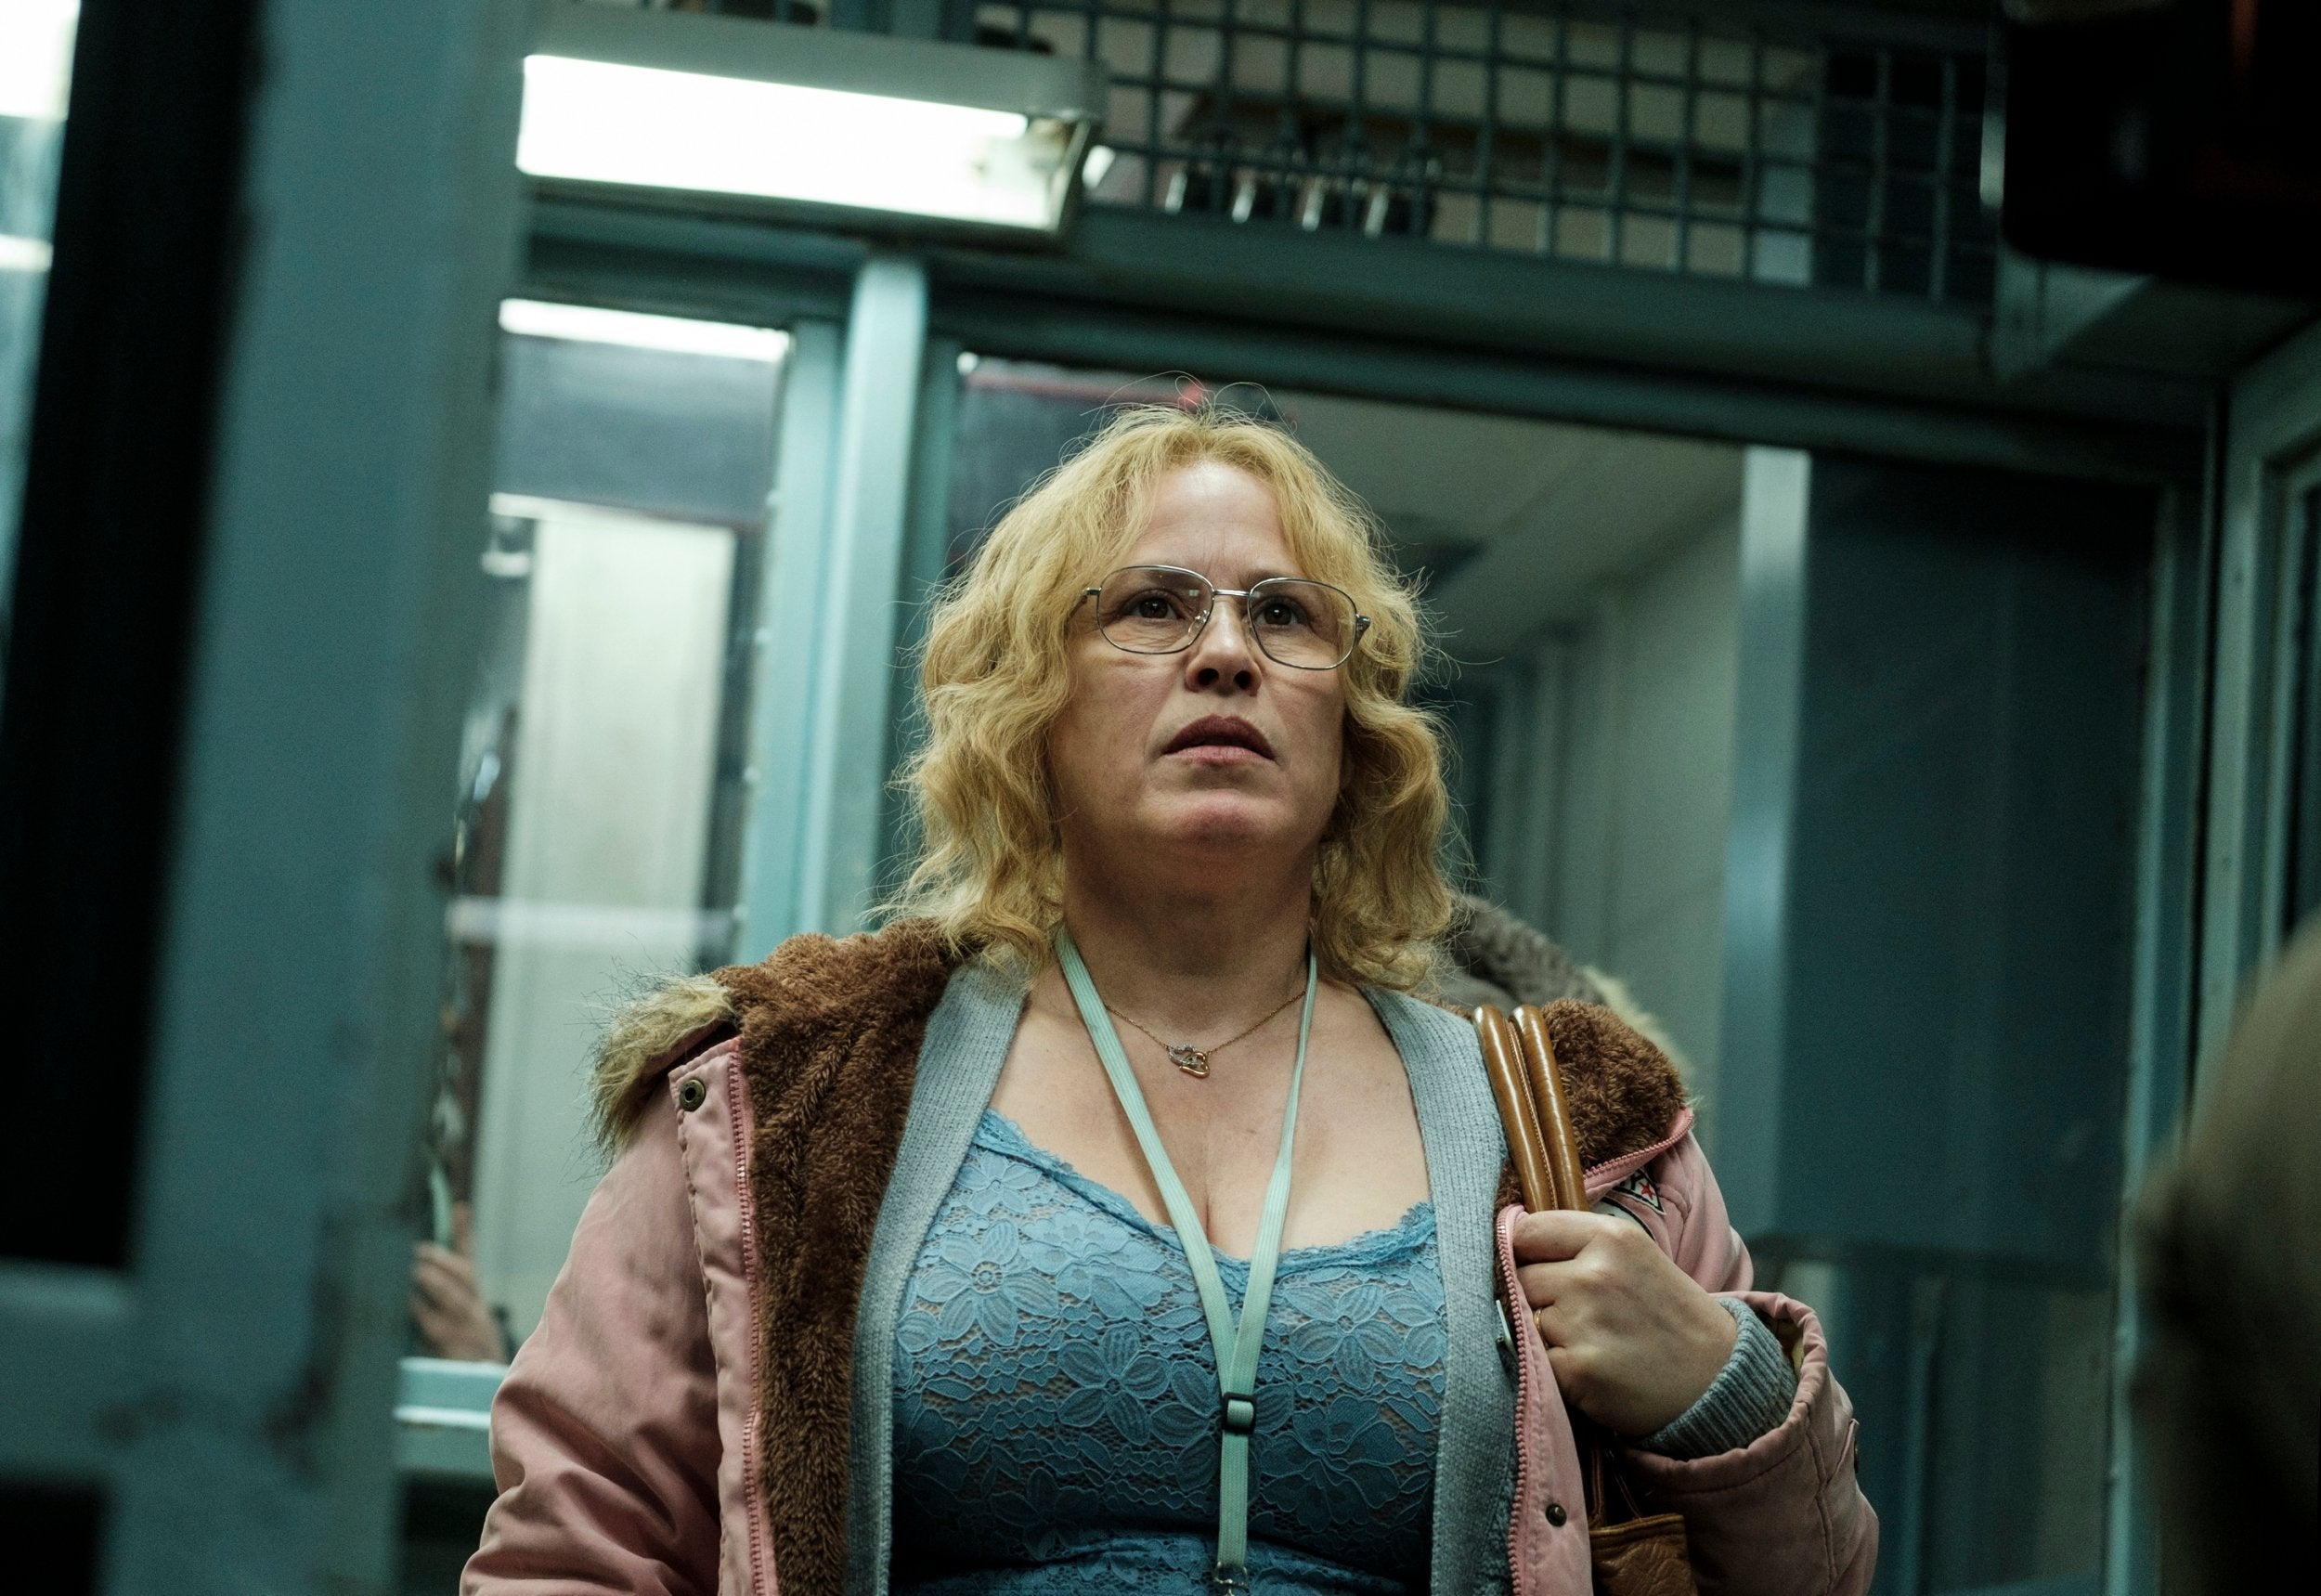 Best Performance by an Actress in a Limited Series or Motion Picture Made for Television: Patricia Arquette (Escape at Dannemora)